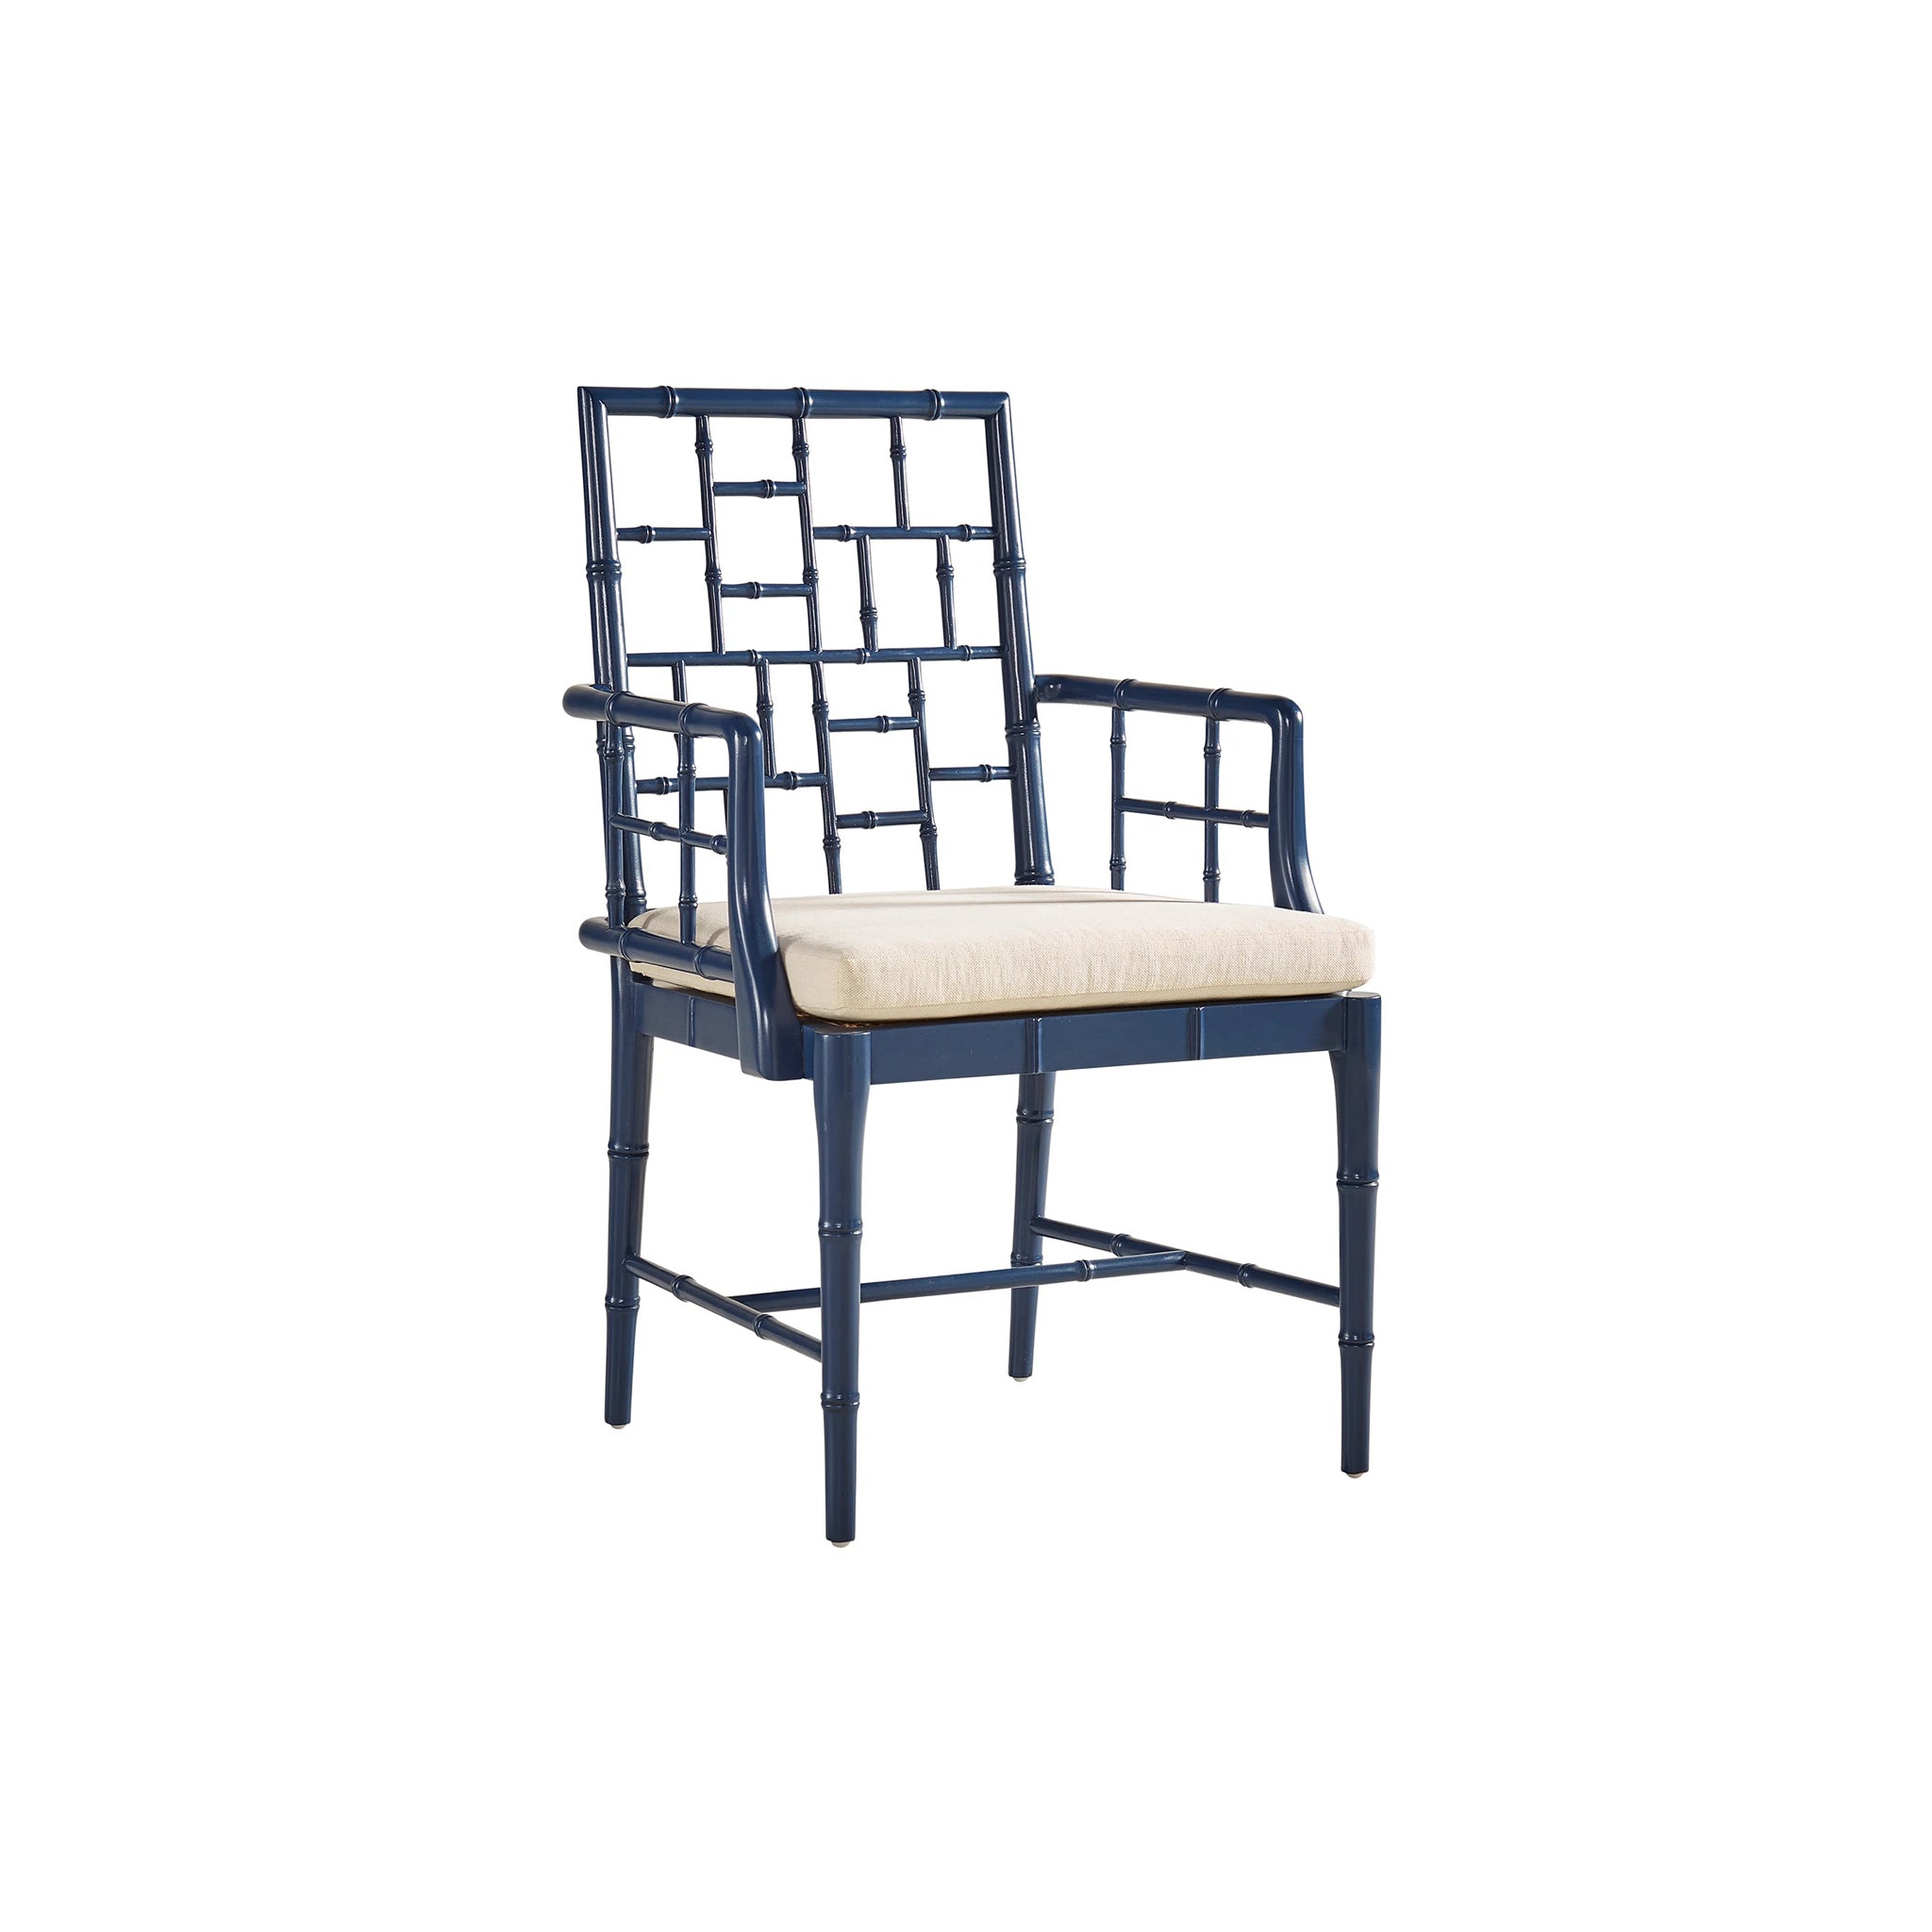 Square Chippendale Bamboo-Look Chair